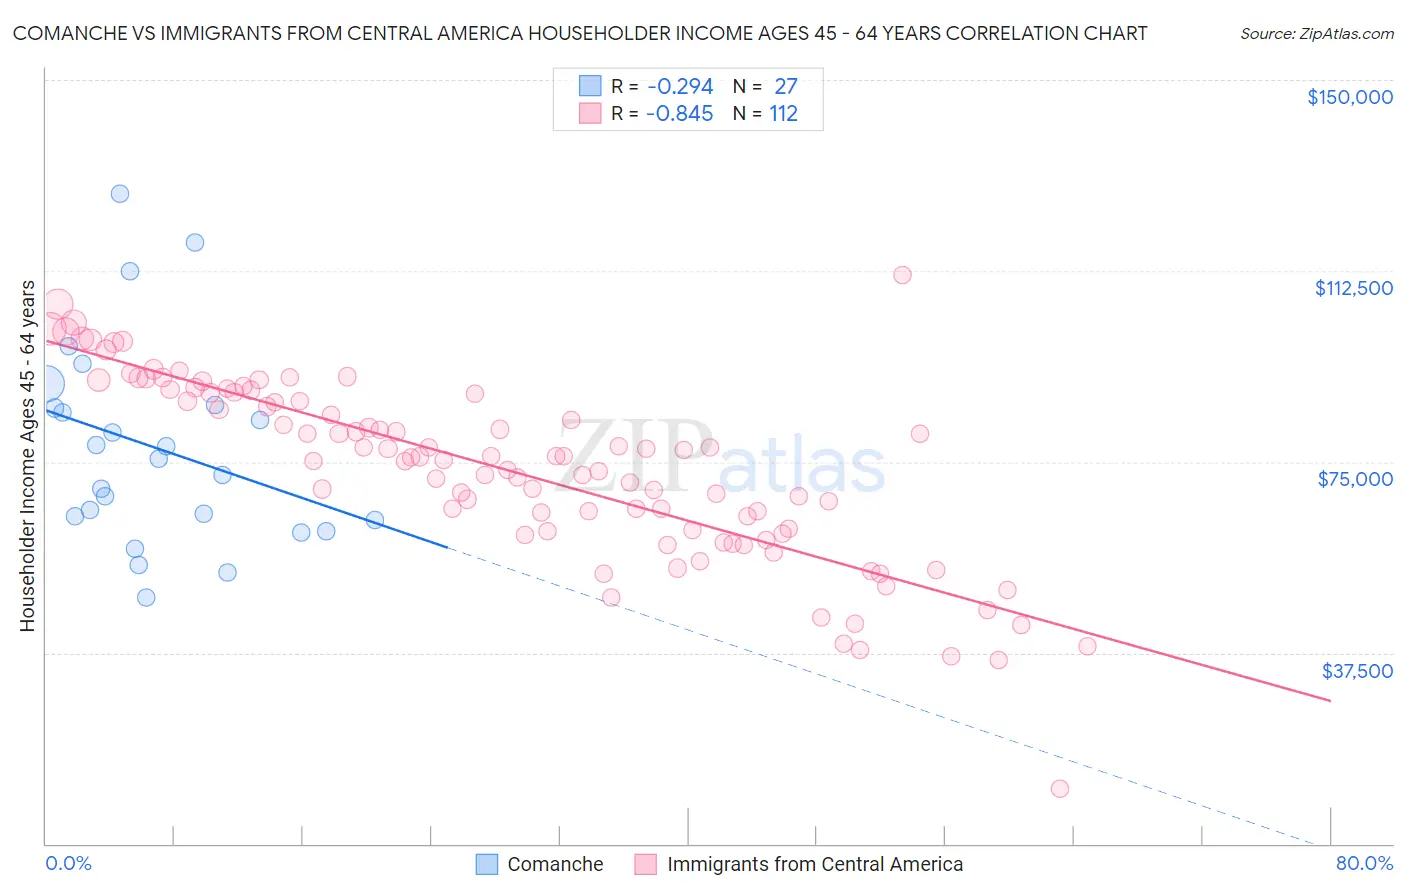 Comanche vs Immigrants from Central America Householder Income Ages 45 - 64 years